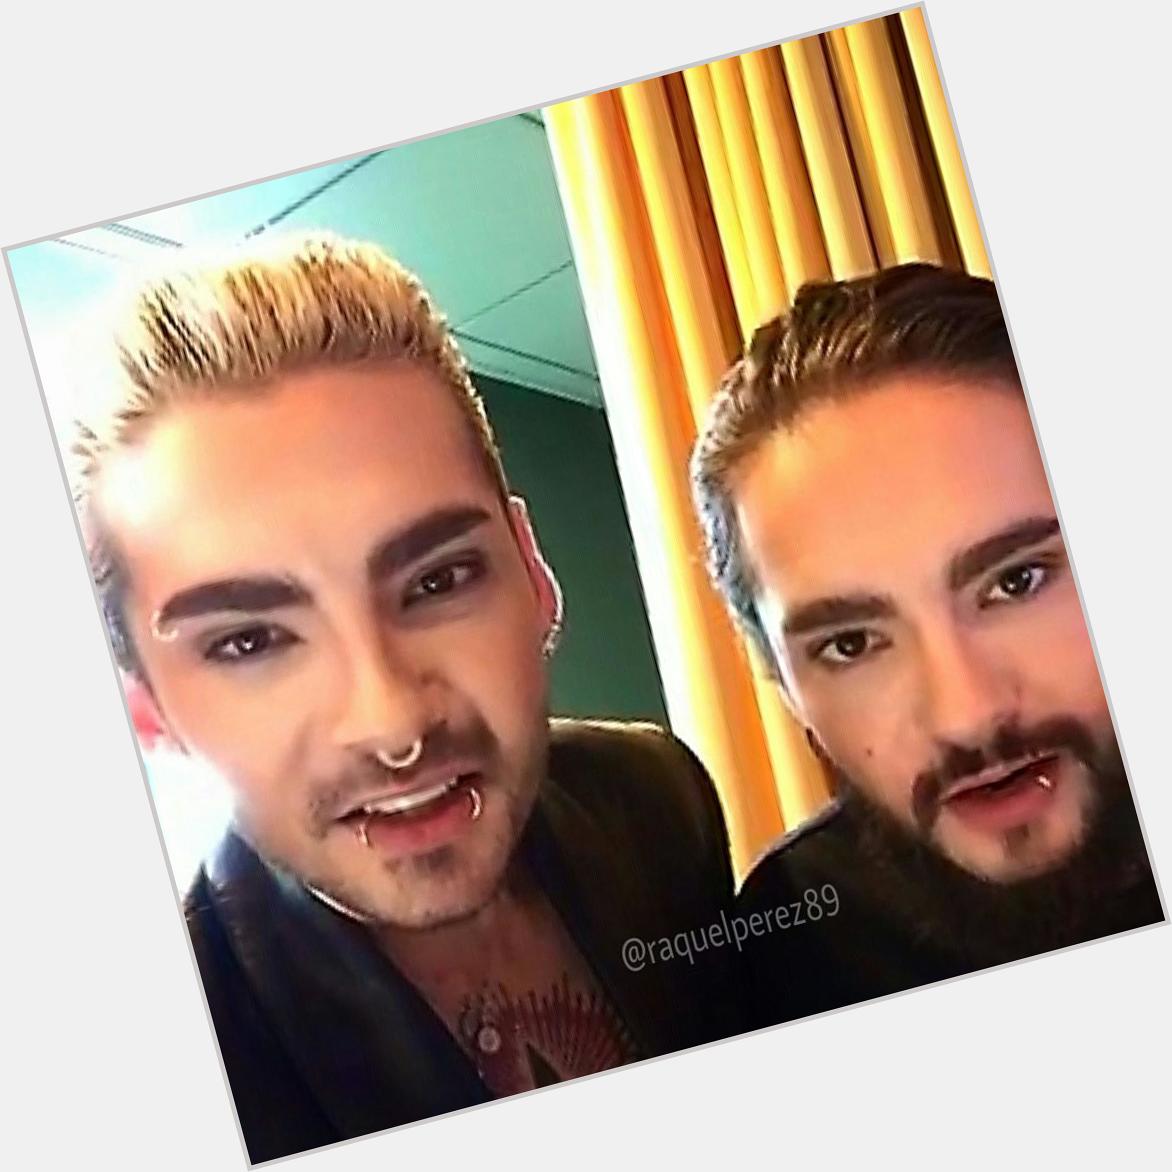 Massive Happy birthday to my dear Bill and lovely Tom Kaulitz. You\re both awesome.       